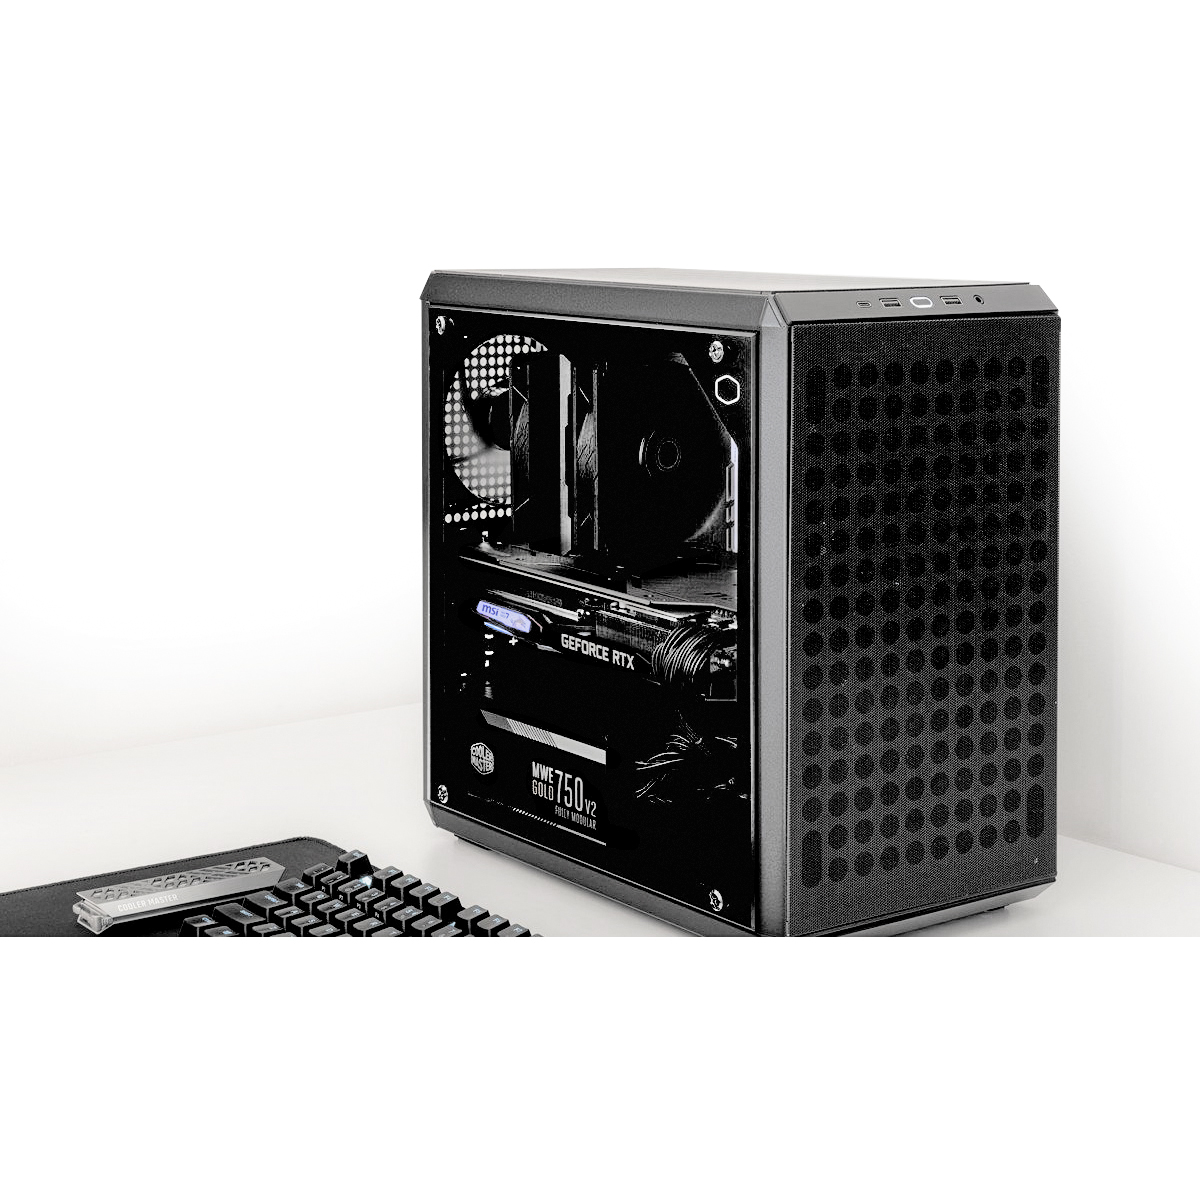 How to avoid buying a PC case that’s too small or too large